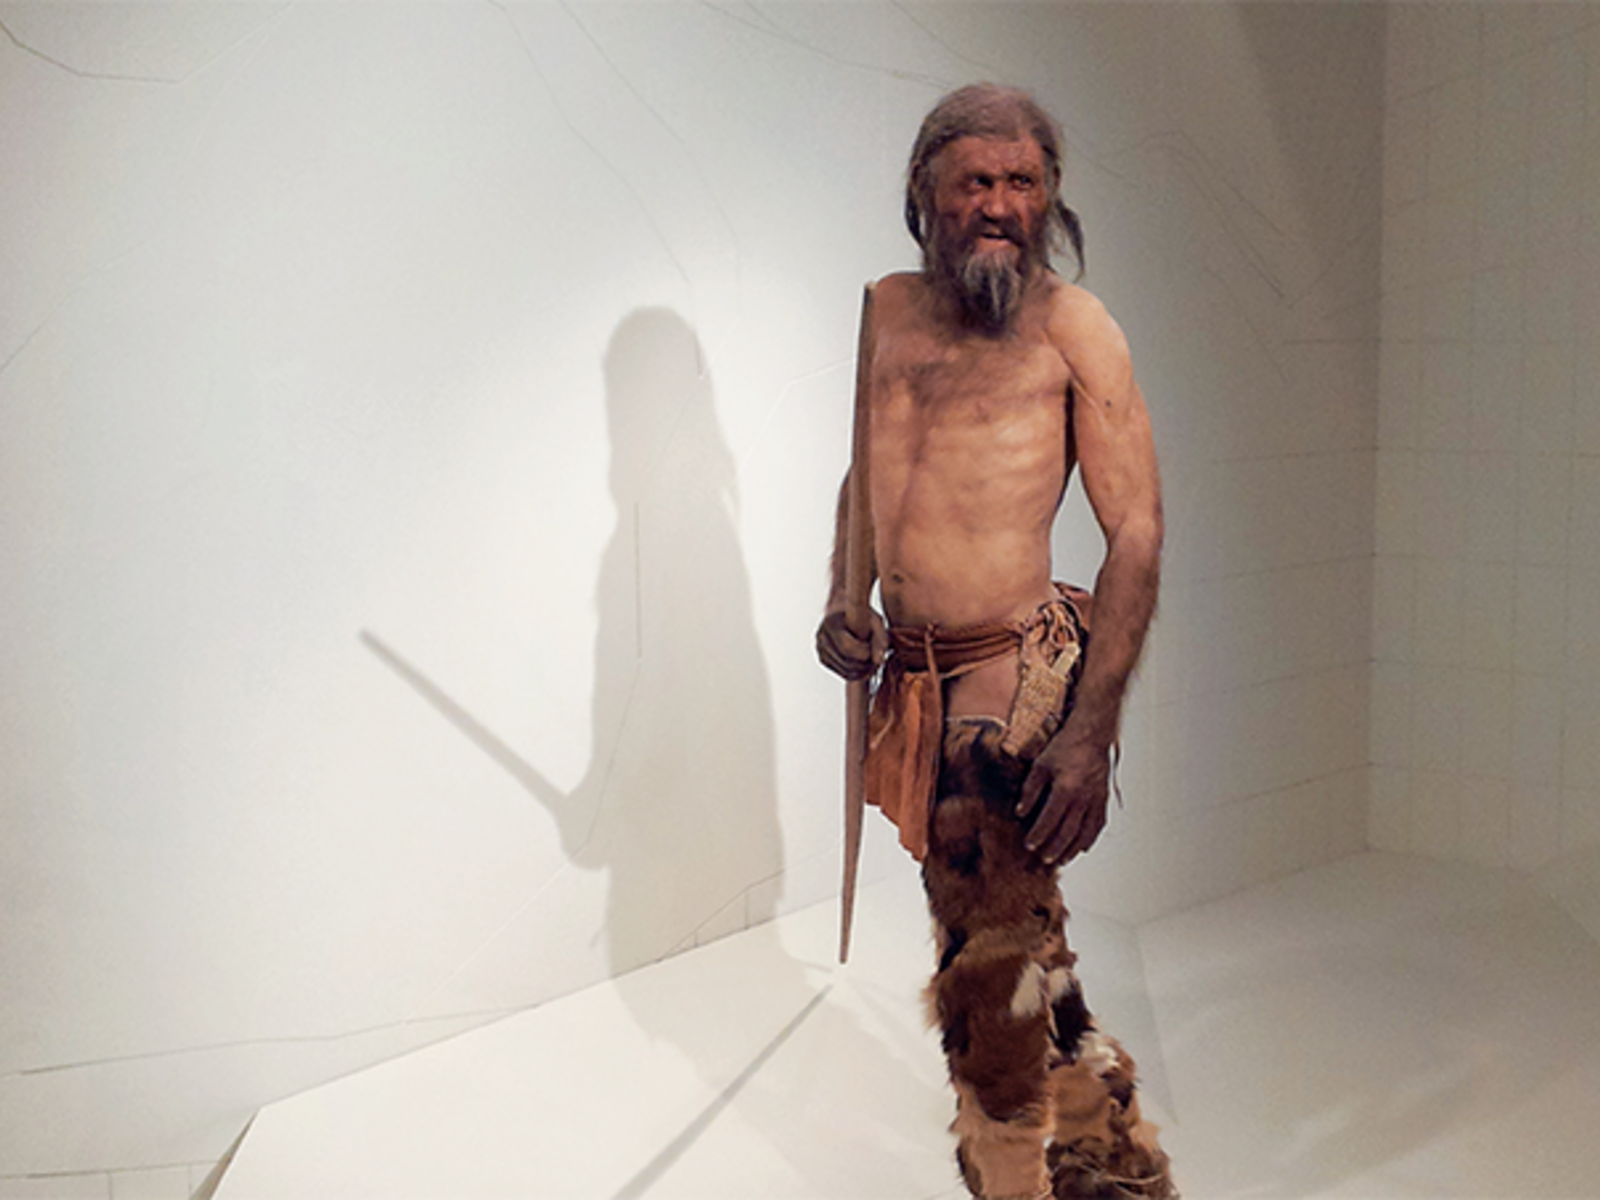 Genome sequencing unravels the mystery of Ötzi the Iceman